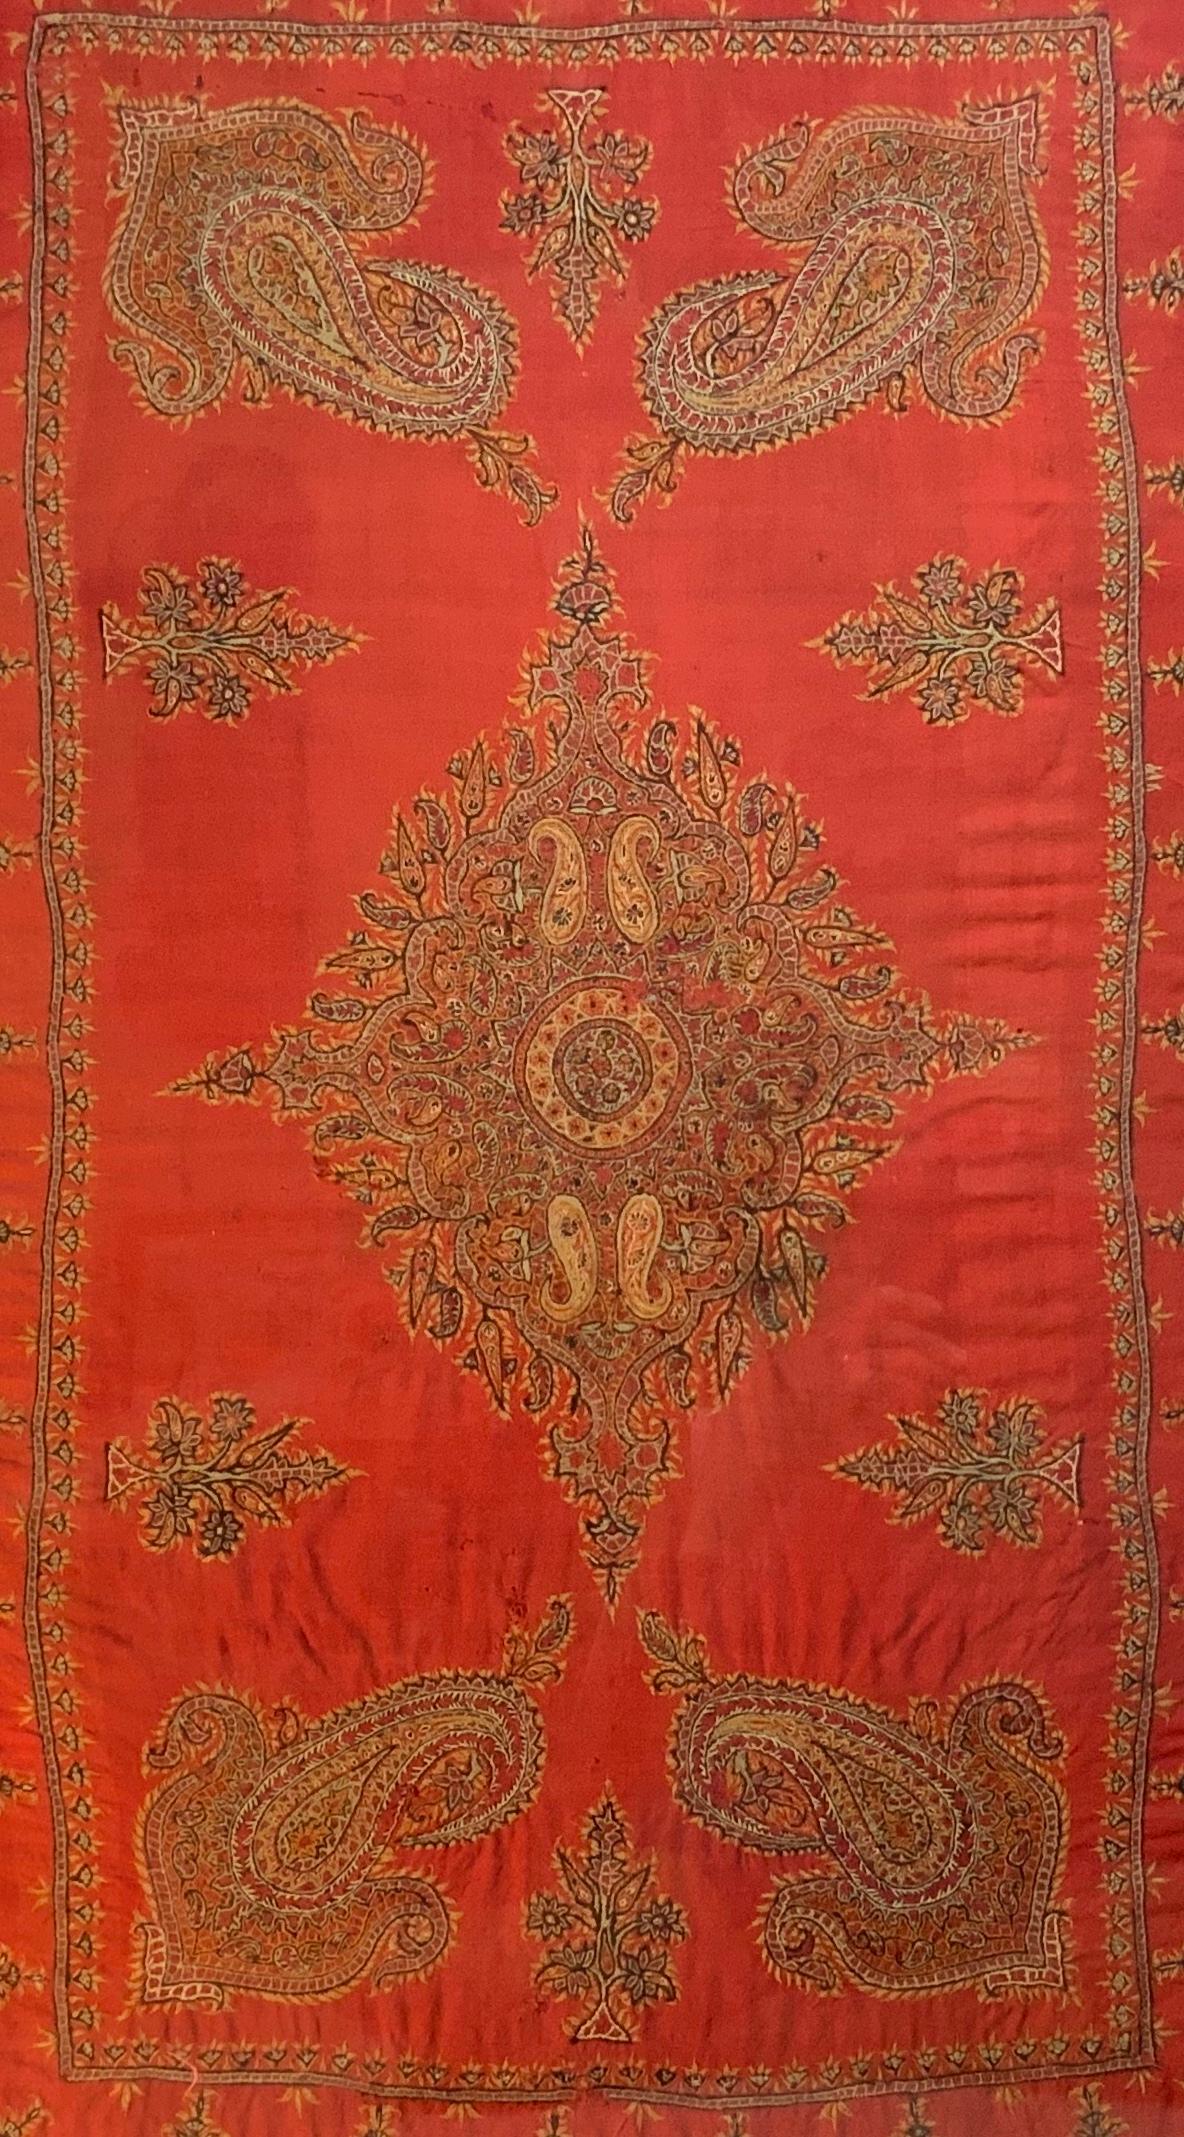 Early 20th Century Hand Embroidery Suzani Wall Hanging 12